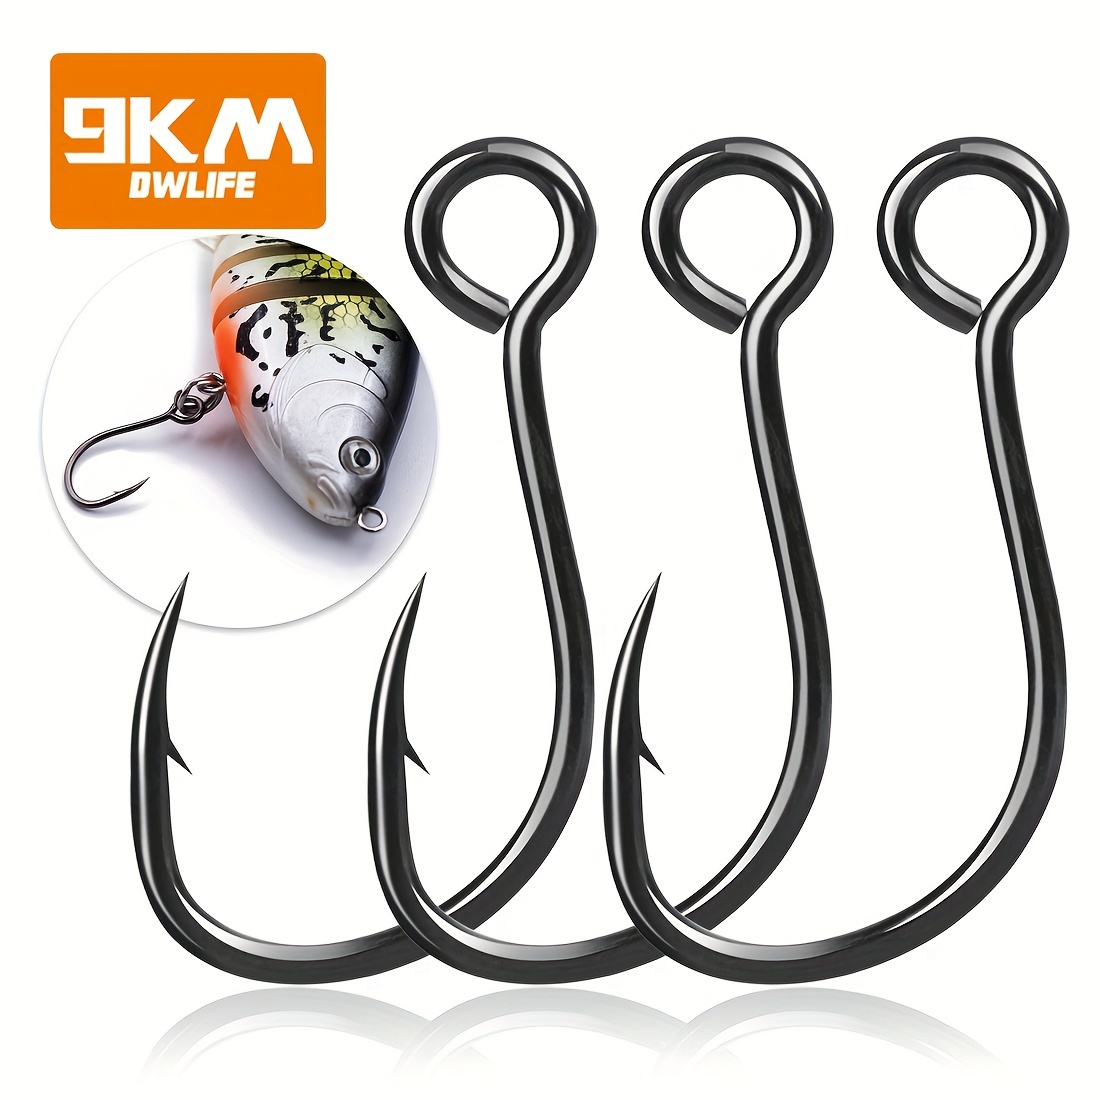 OWNER SINGLE REPLACEMENT HOOKS - The Fisherman